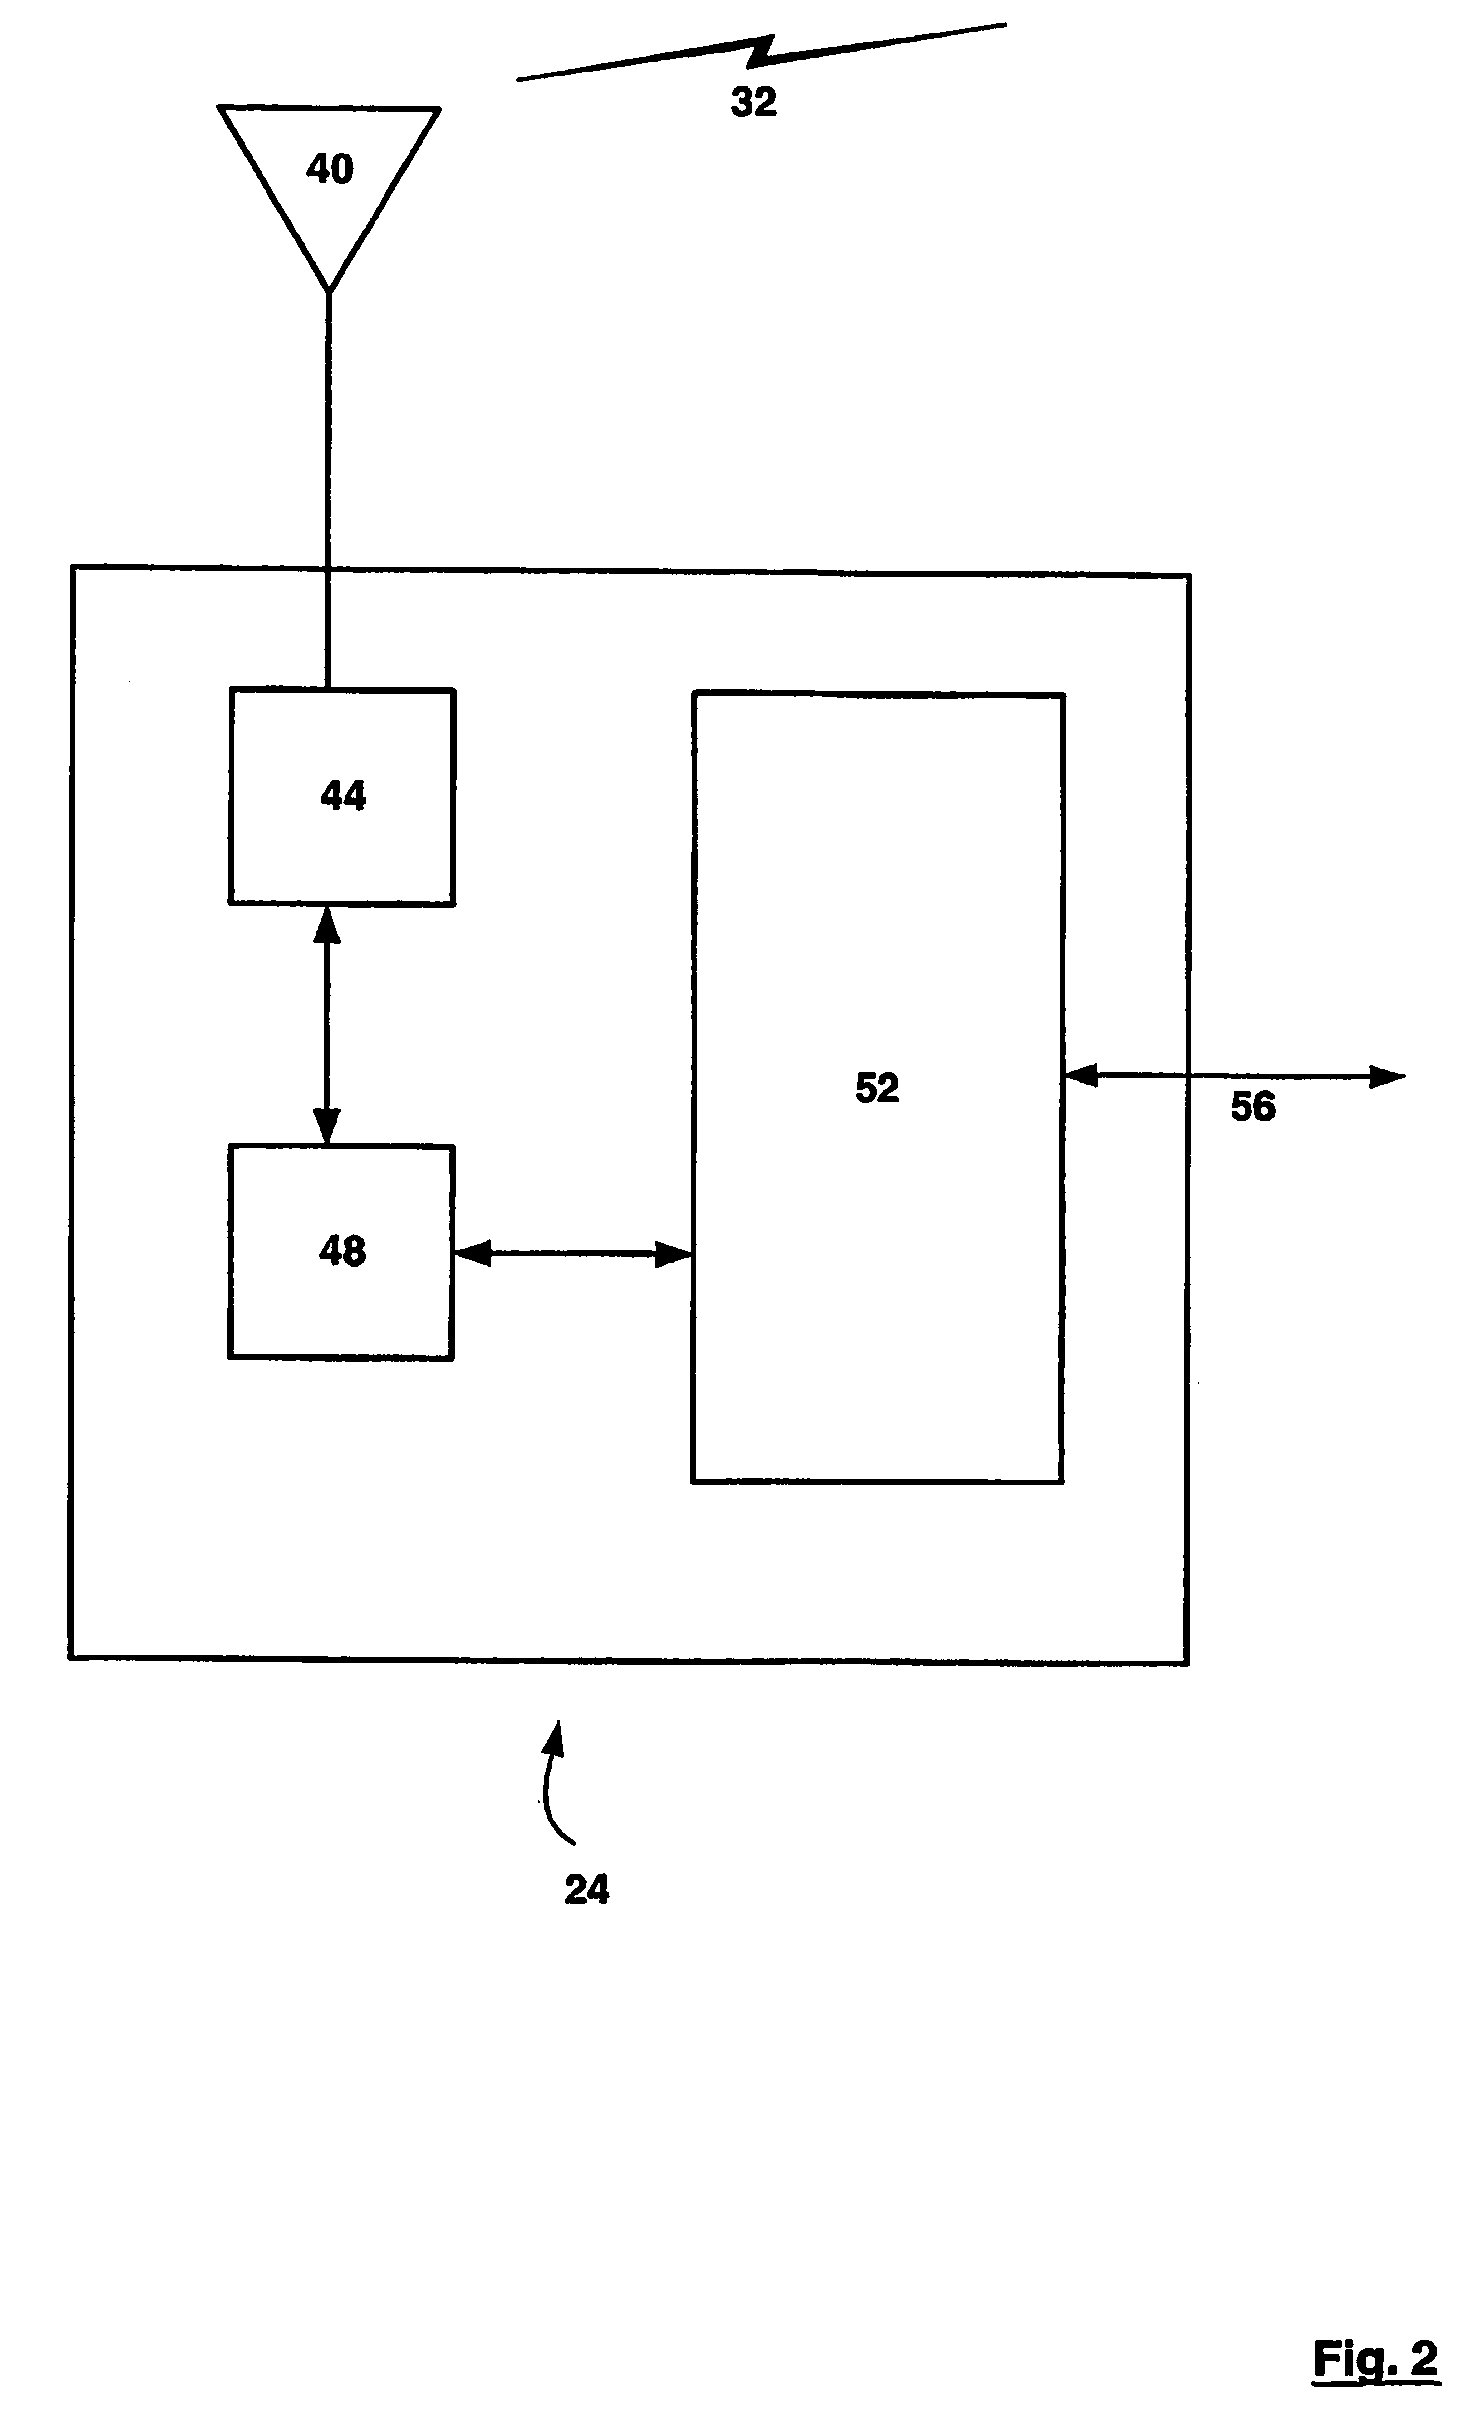 Method, system and apparatus for transmitting interleaved data between stations